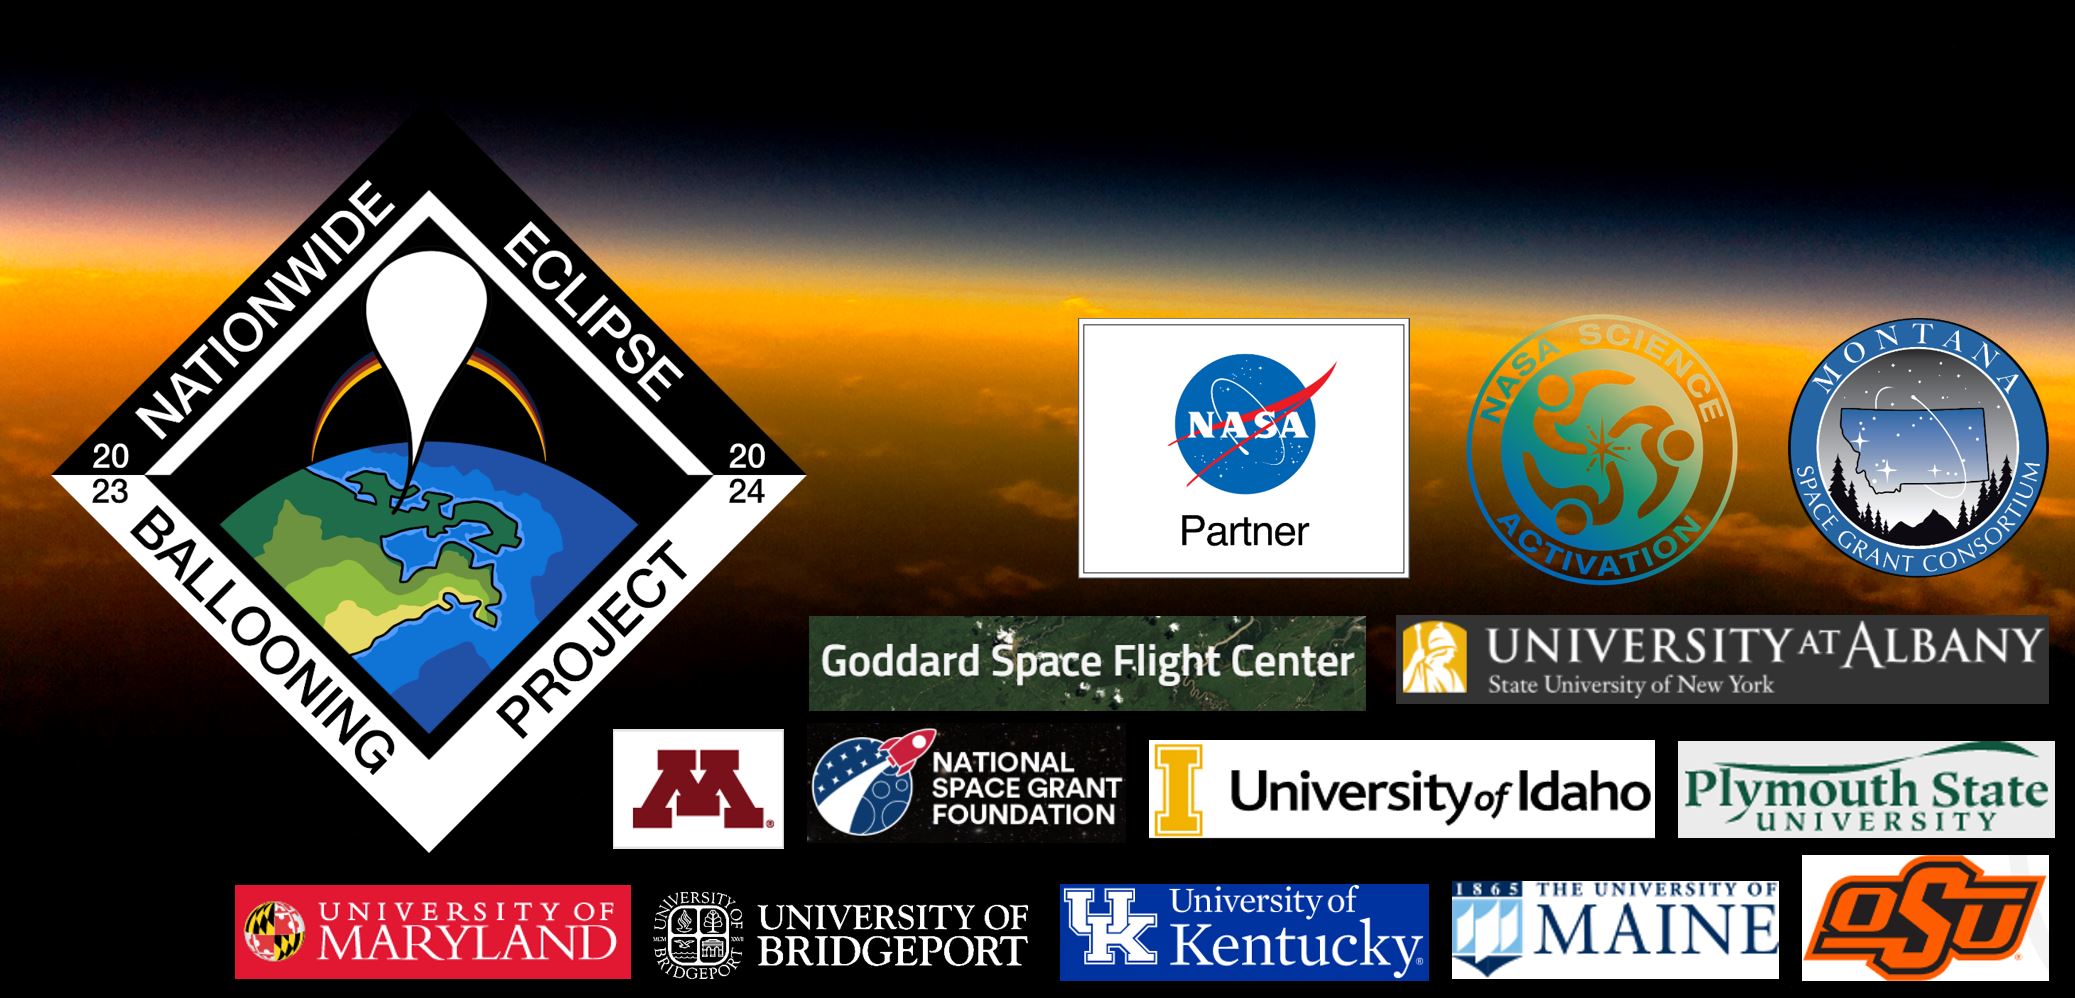 Orange atmosphere with black of space above and black moon shadow below. Logos for participating institutuions: NASA Partner, NASA Science Activation, Montana Space Grant Consortium, Goddard Space Flight Center, SUNY Albany, University of Minnesota, National Space Grant Foundation, University of Idaho, Plymouth State University, University of Maryland, University of Bridgeport, University of Kentucky, University of Maine, Oklahoma State University